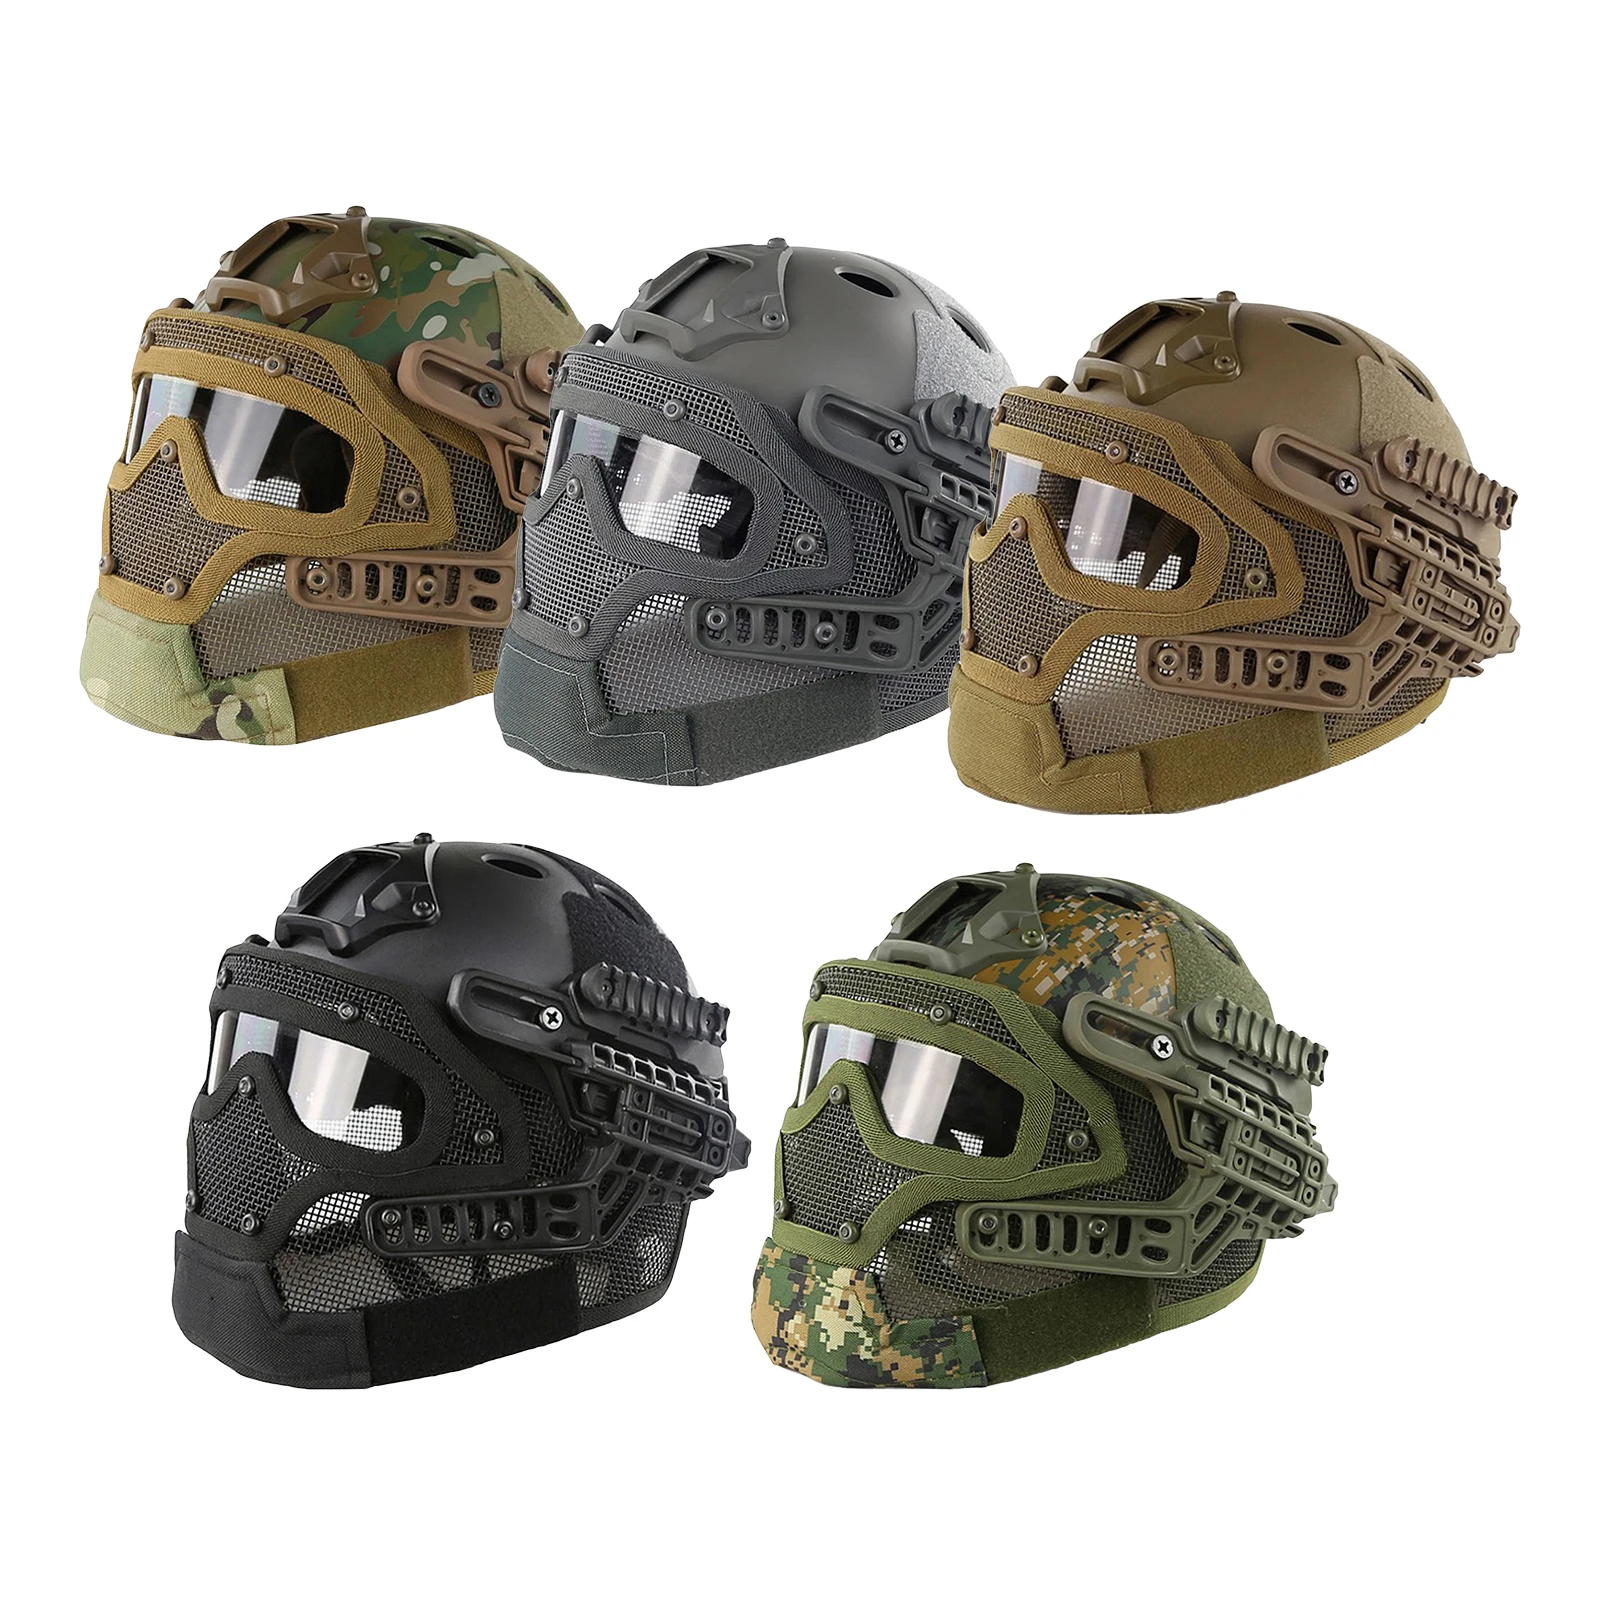 New Tactical Airsoft Paintball Protect Combat FAST Helmet Riding Gaming Climbing 